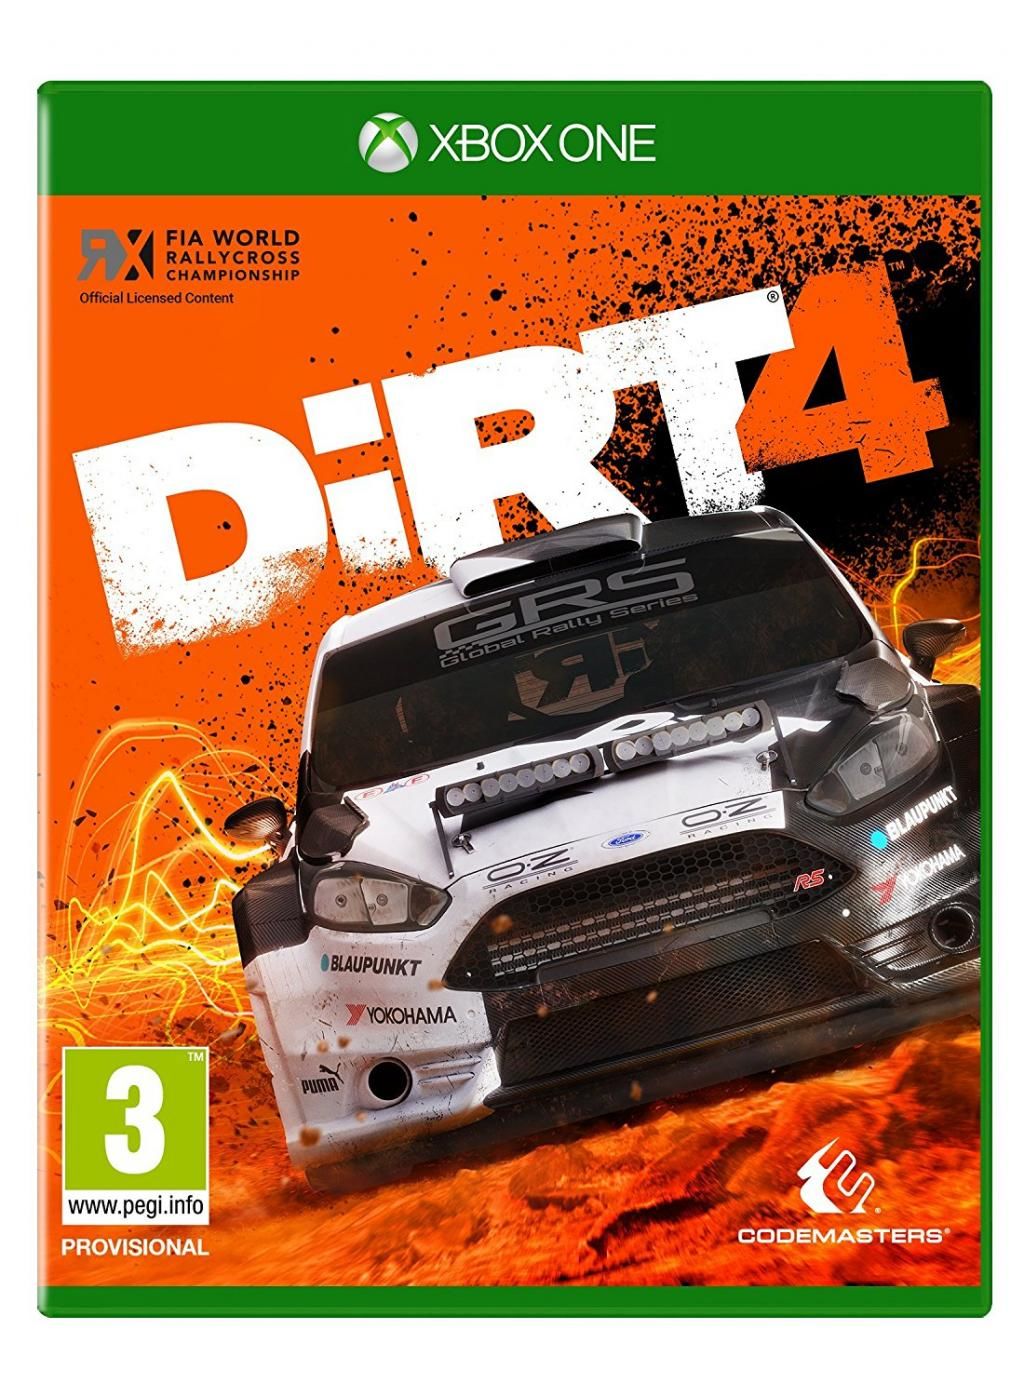 DiRT 4 Day One Edition